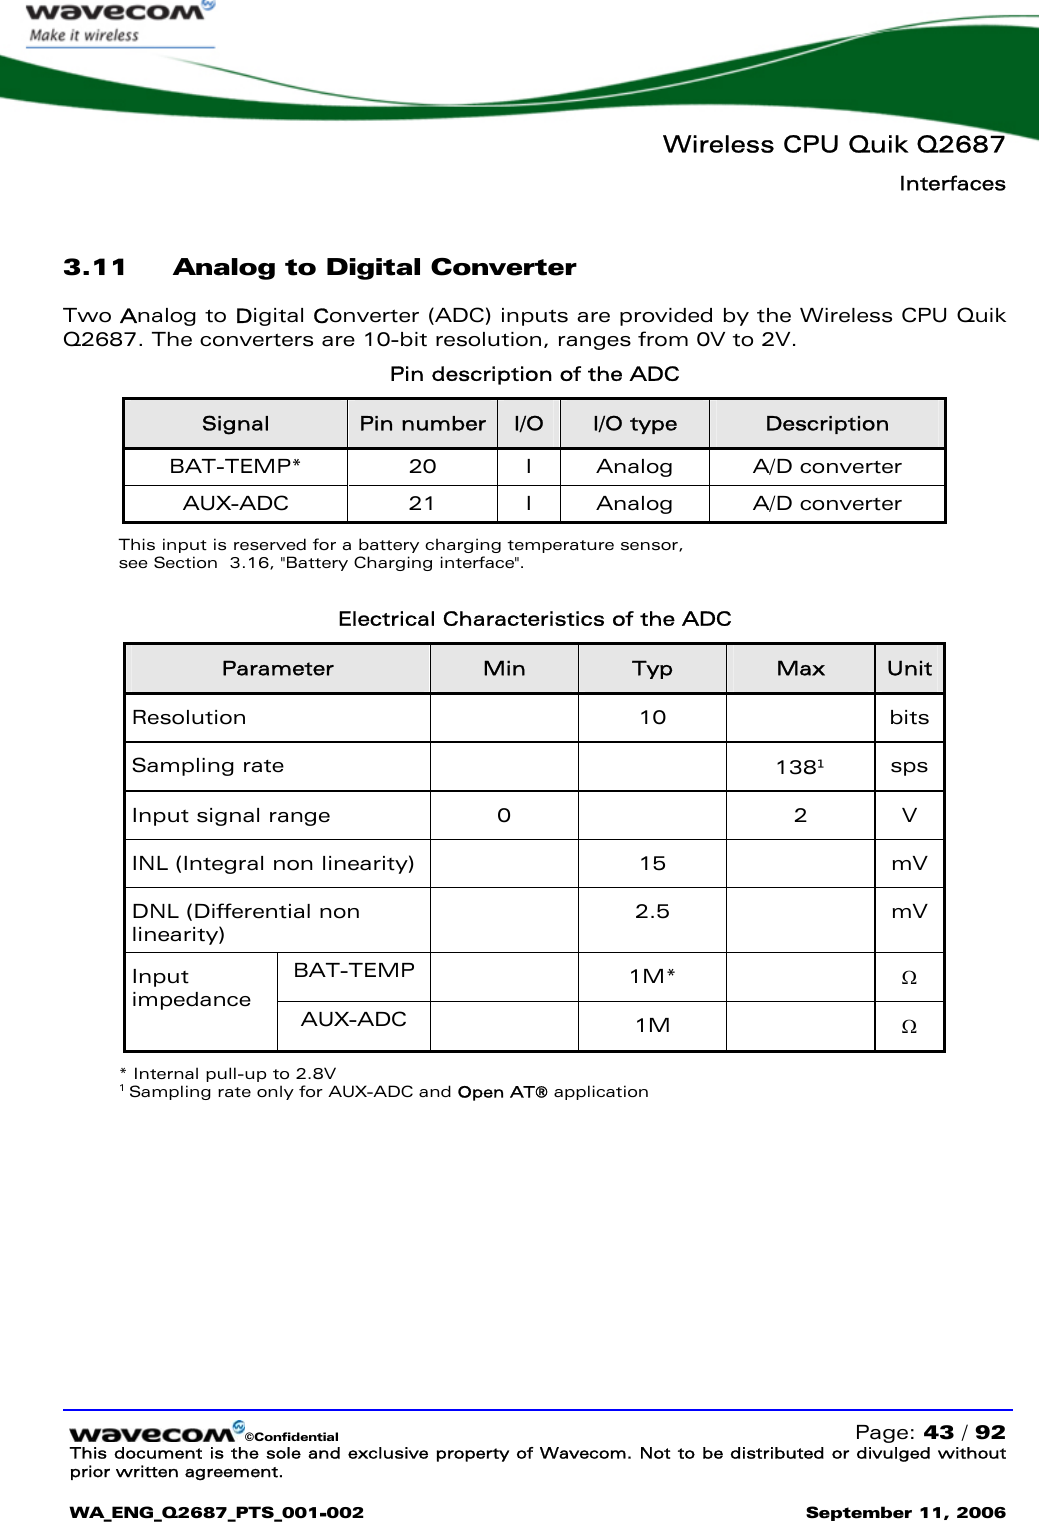   Wireless CPU Quik Q2687 Interfaces   ©Confidential   Page: 43 / 92 This document is the sole and exclusive property of Wavecom. Not to be distributed or divulged without prior written agreement.  WA_ENG_Q2687_PTS_001-002 September 11, 2006   3.11 Analog to Digital Converter Two Analog to Digital Converter (ADC) inputs are provided by the Wireless CPU Quik Q2687. The converters are 10-bit resolution, ranges from 0V to 2V.  Pin description of the ADC Signal  Pin number  I/O  I/O type  Description BAT-TEMP* 20 I Analog A/D converter AUX-ADC 21 I Analog A/D converter This input is reserved for a battery charging temperature sensor,  see Section  3.16, &quot;Battery Charging interface&quot;.  Electrical Characteristics of the ADC Parameter  Min  Typ  Max  Unit Resolution  10  bits Sampling rate      138¹ sps Input signal range  0  2 V INL (Integral non linearity)    15    mV DNL (Differential non linearity)  2.5  mV BAT-TEMP   1M*  Ω Input impedance  AUX-ADC   1M  Ω * Internal pull-up to 2.8V 1 Sampling rate only for AUX-ADC and Open AT® application 